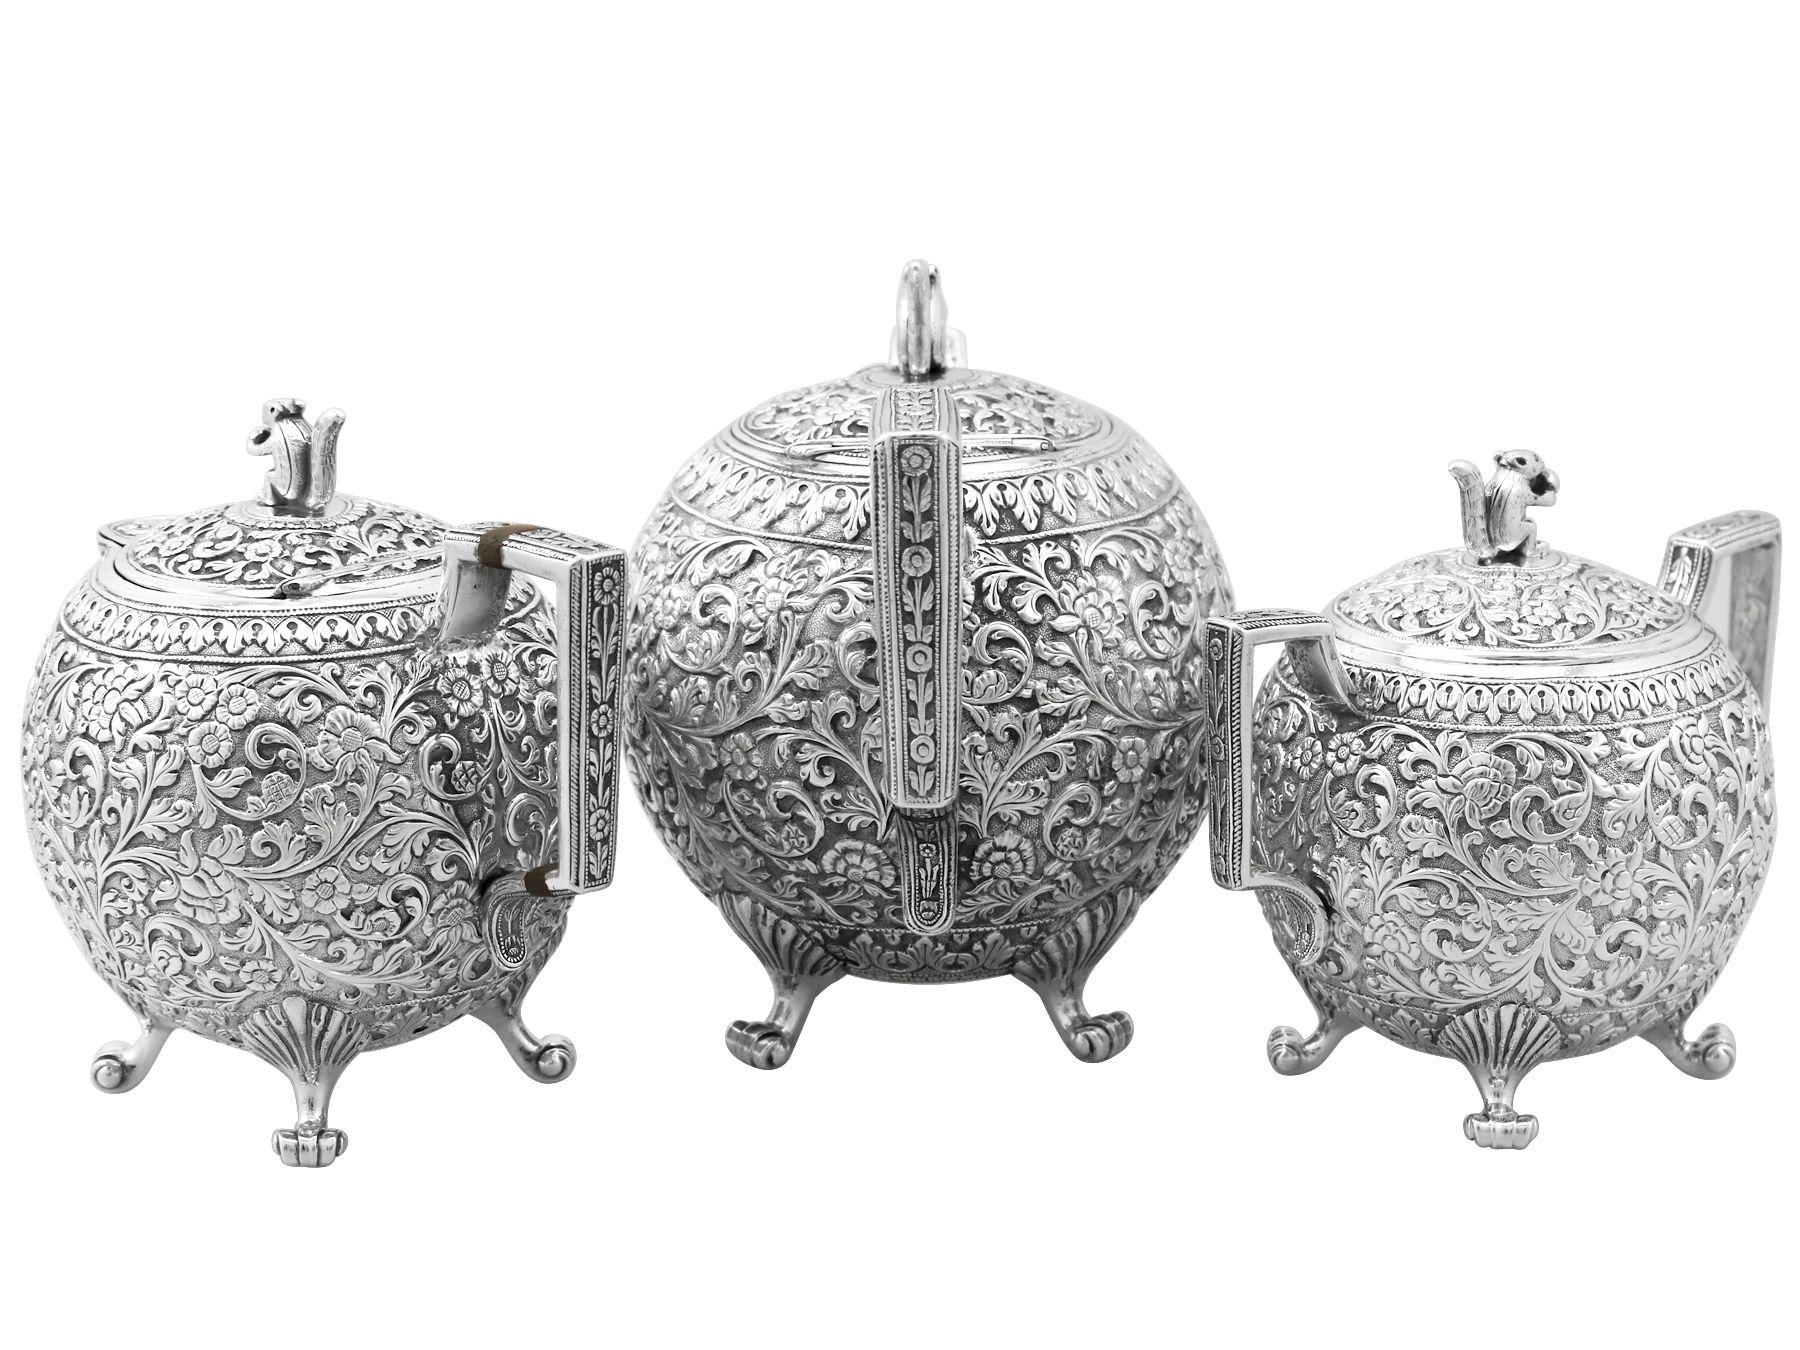 An exceptional, fine and impressive antique Indian silver three piece tea service made by Oomersee Mawjee & Sons; an addition to our diverse silver teaware collection.

This exceptional antique Indian silver tea service/set consists of a teapot,